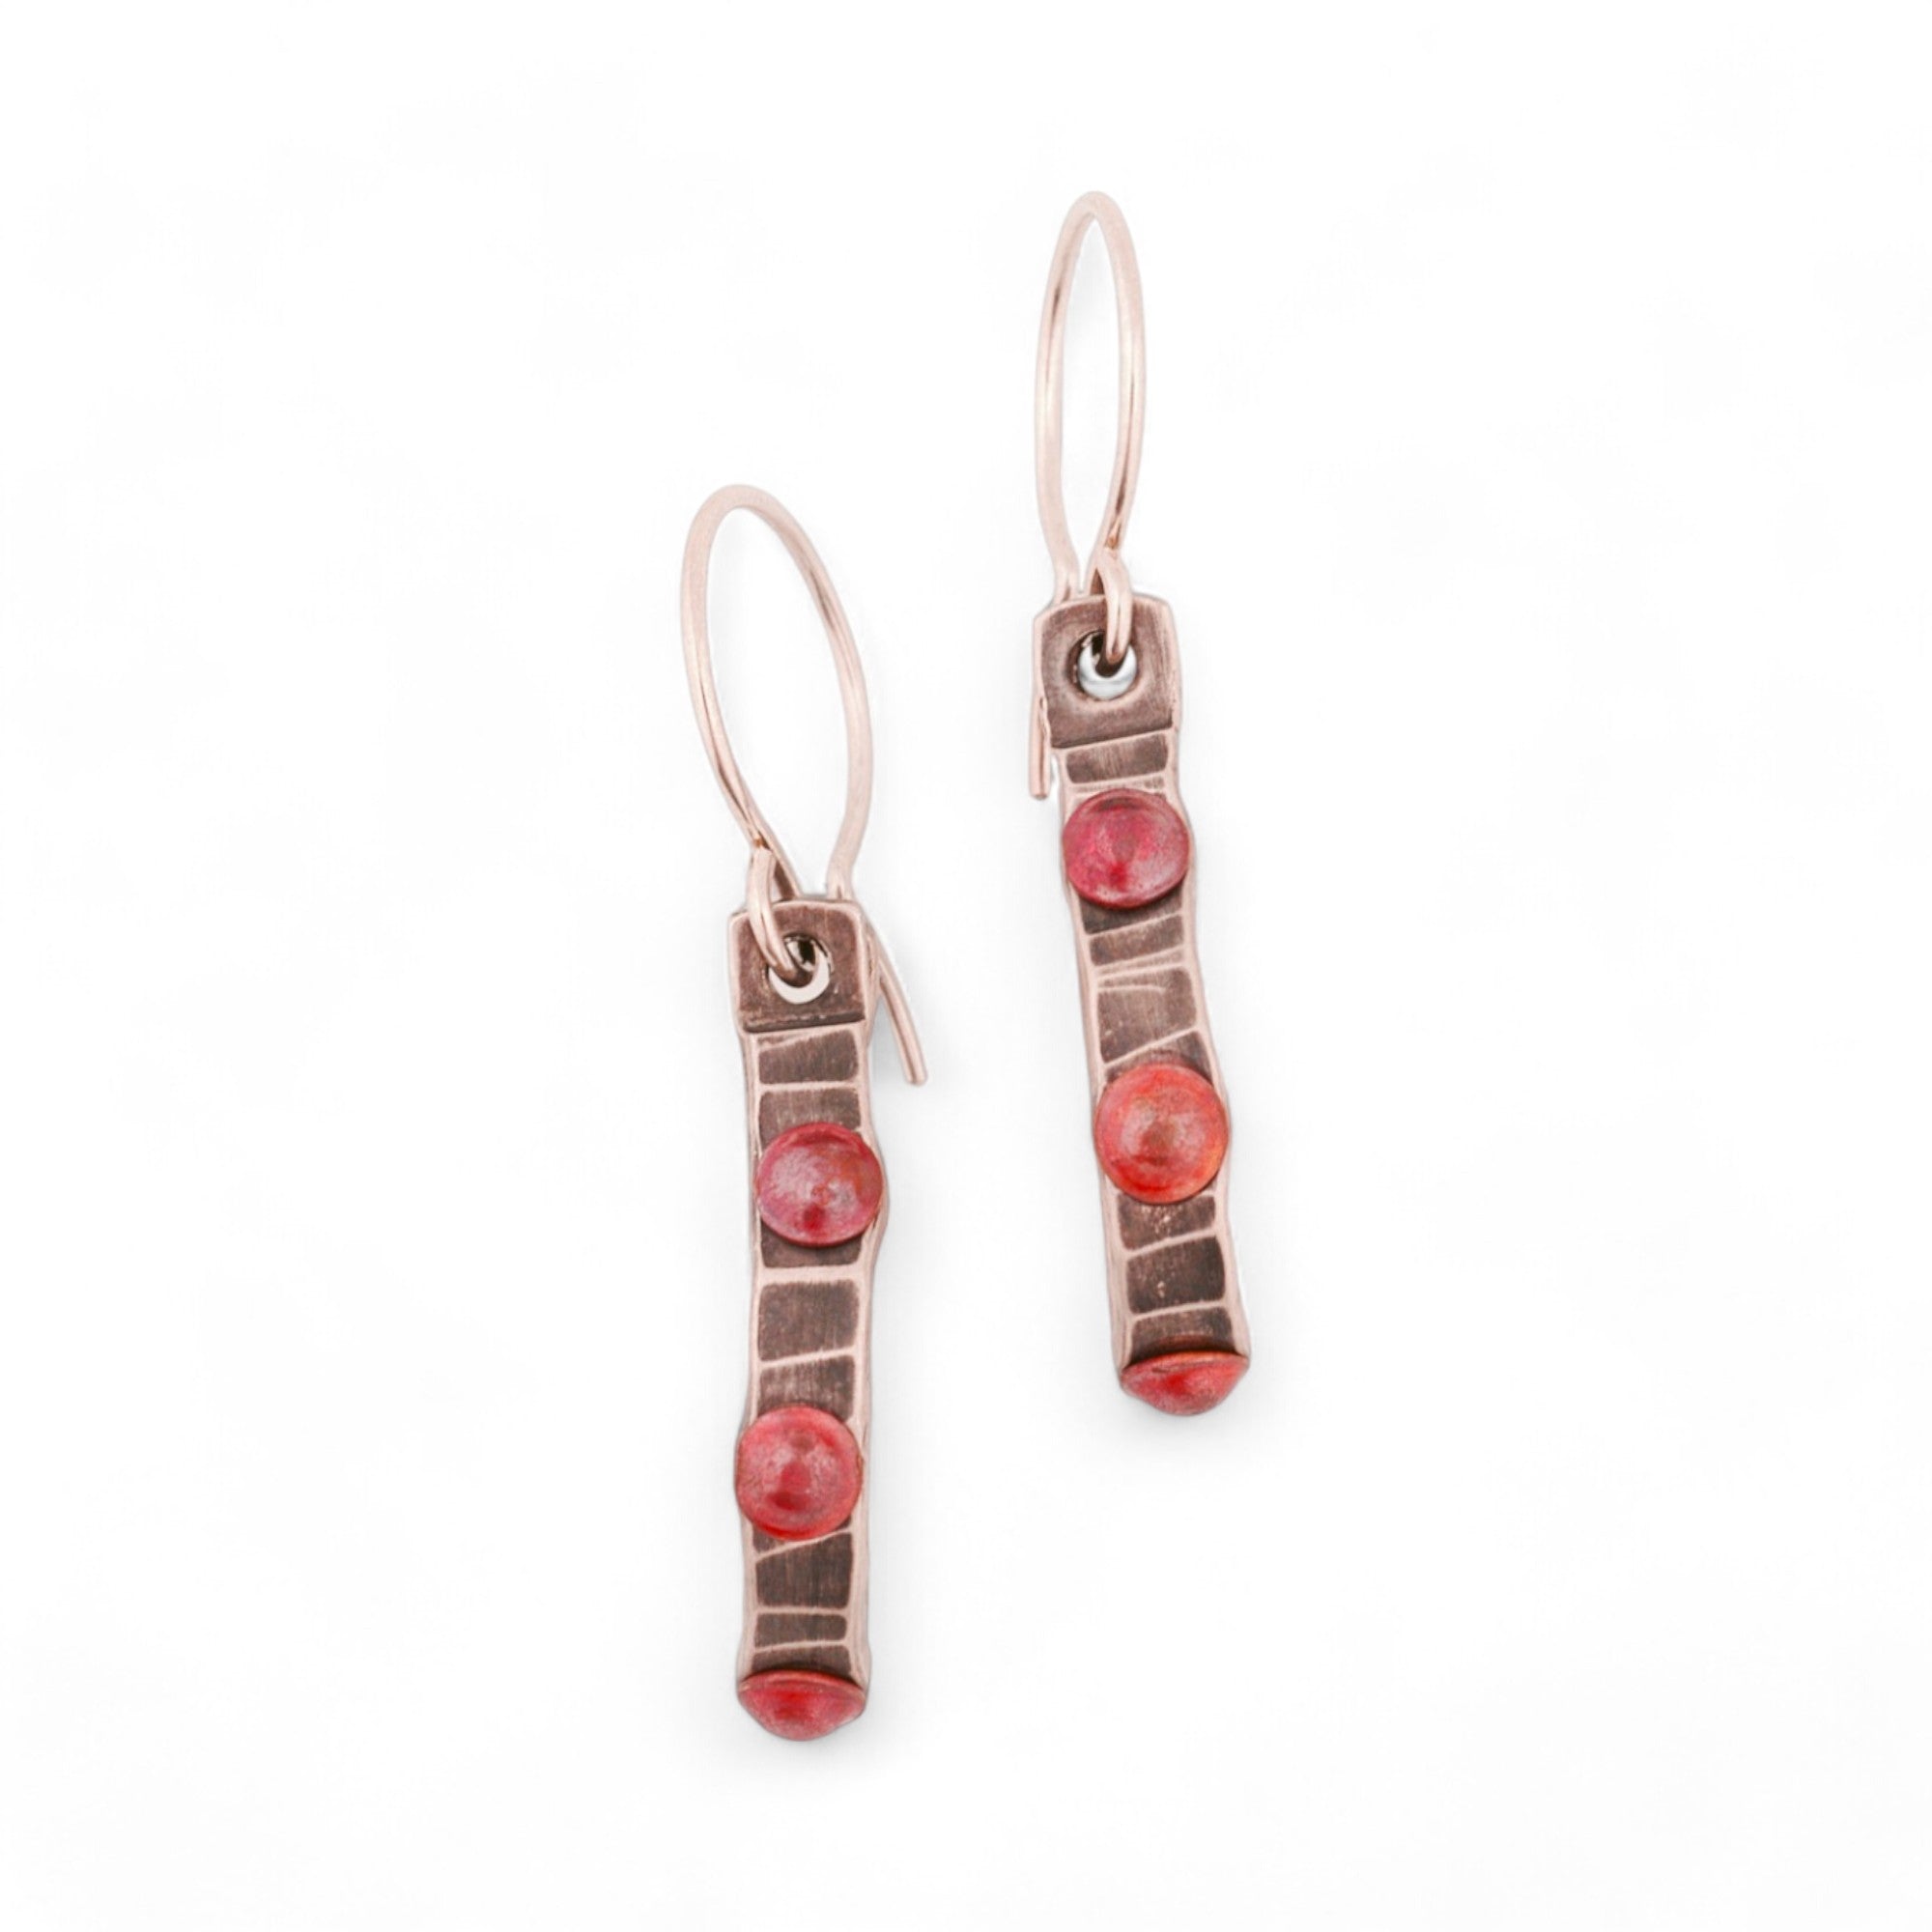 Textured Sterling Silver Teardrop Earrings with Copper Pearls